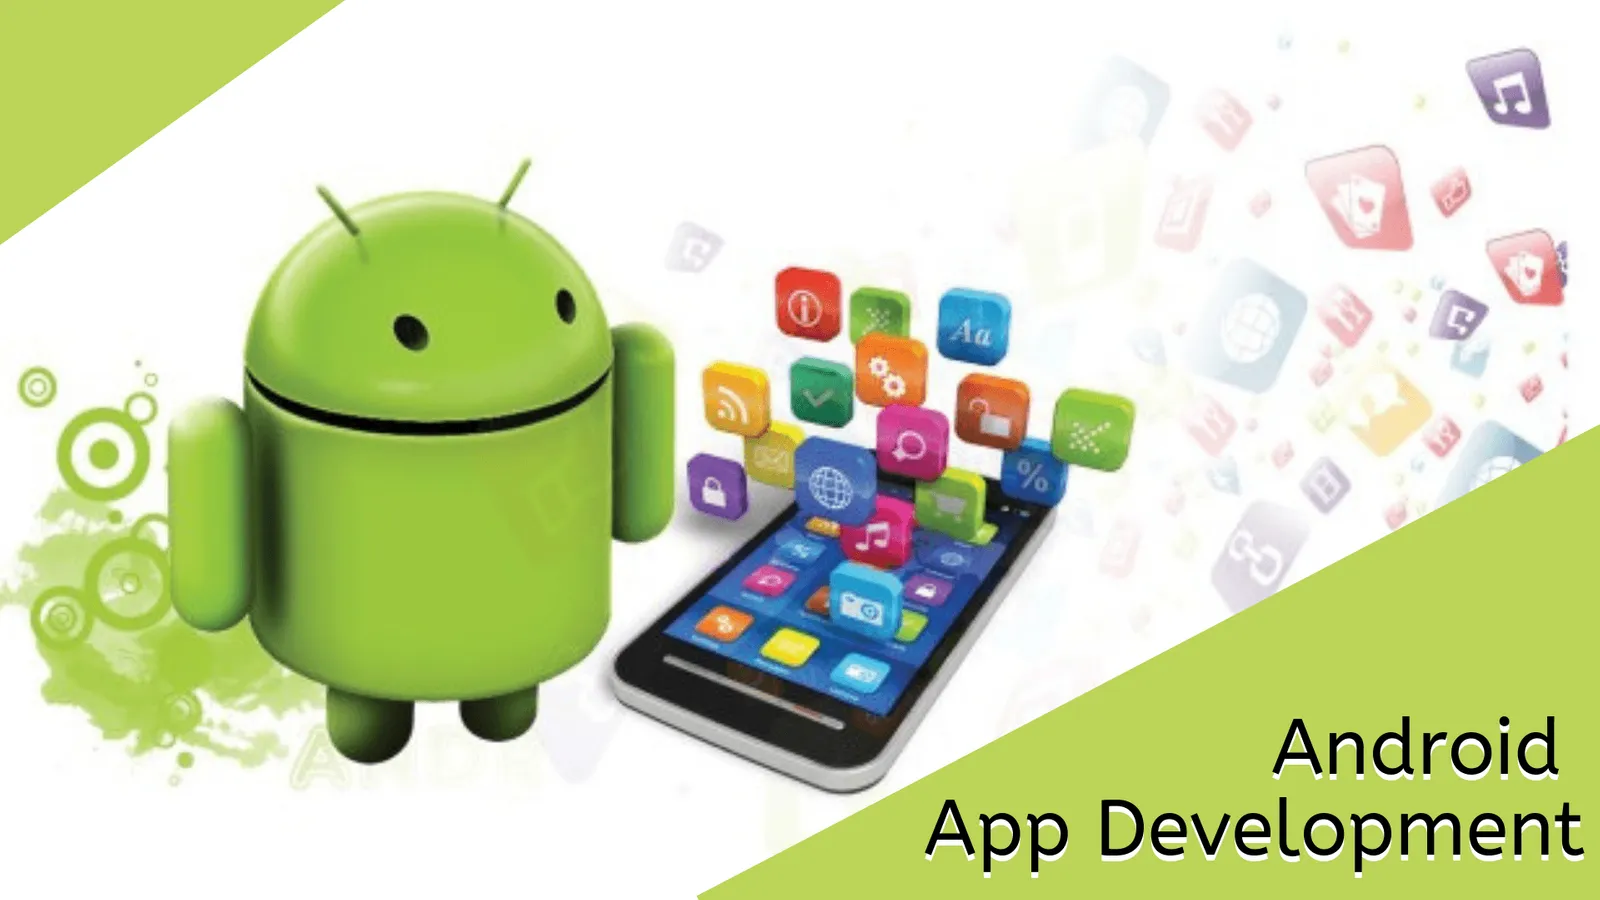 Best Android App Development Services Company in United States